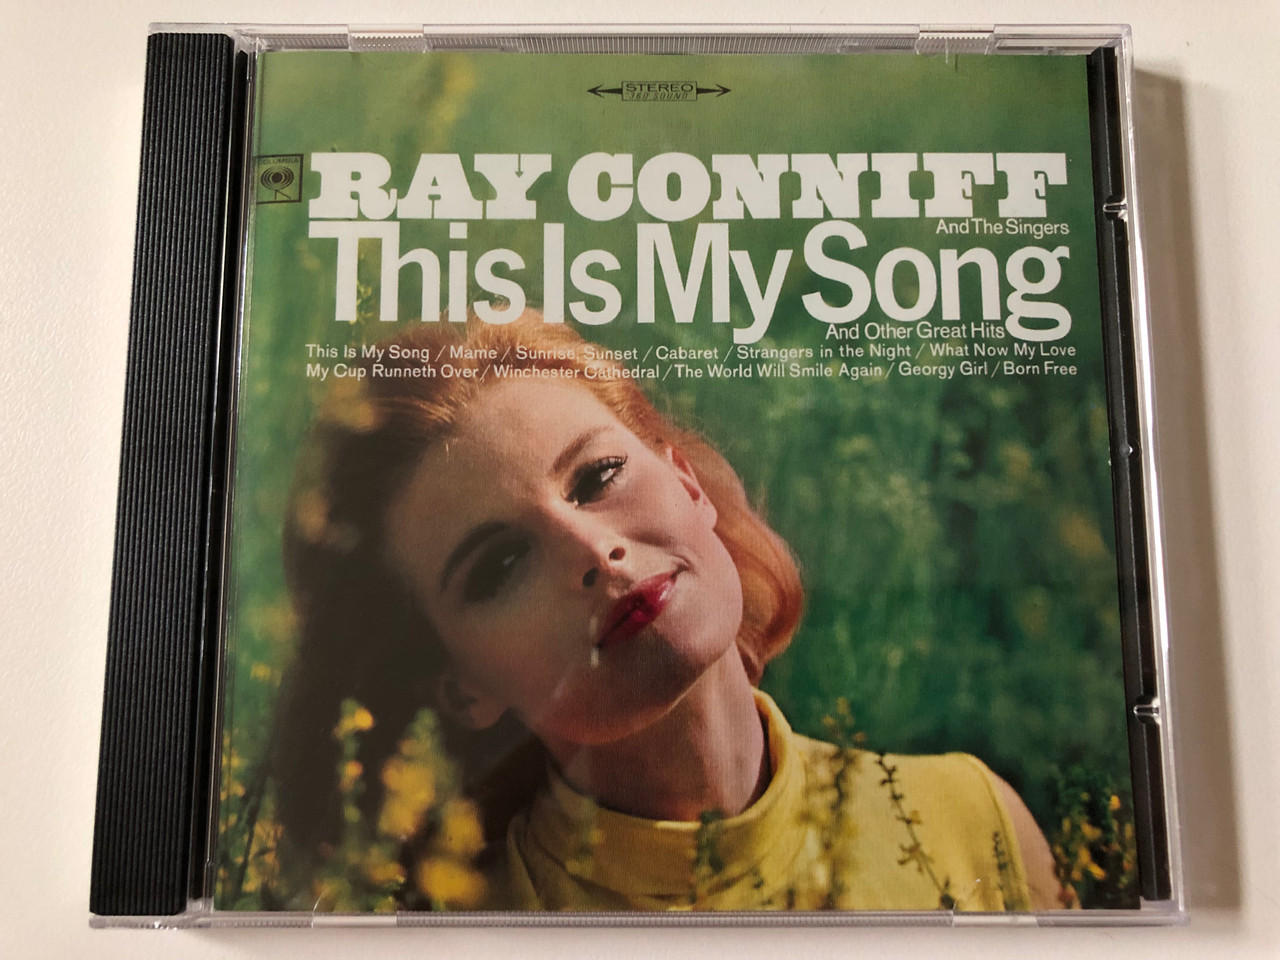 https://cdn10.bigcommerce.com/s-62bdpkt7pb/products/0/images/258013/Ray_Conniff_And_The_Singers_This_Is_My_Song_And_Other_Great_Hits_This_Is_My_Song_Mame_Sunrise_Sunset_Cabaret_Strangers_In_The_Night_What_Now_My_Love_My_Cup_Runneth_Over_Winchester_C_1__79495.1667933572.1280.1280.JPG?c=2&_gl=1*ccvbtl*_ga*MjA2NTIxMjE2MC4xNTkwNTEyNTMy*_ga_WS2VZYPC6G*MTY2NzkzMzM1OS42MjEuMC4xNjY3OTMzMzU5LjYwLjAuMA..